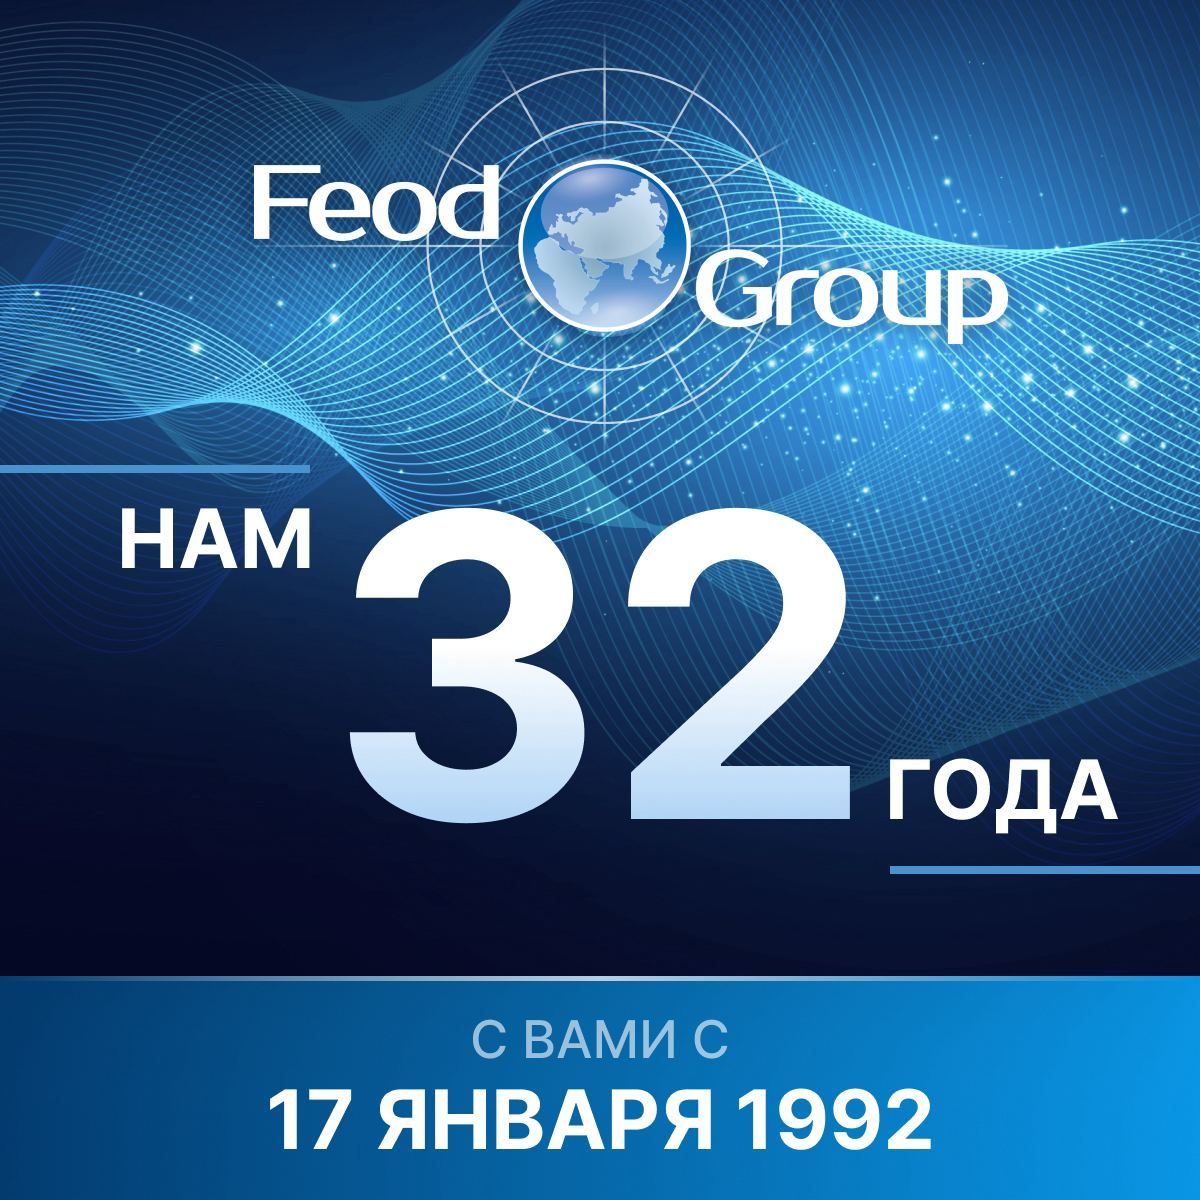 FEOD GROUP is 32 years old!